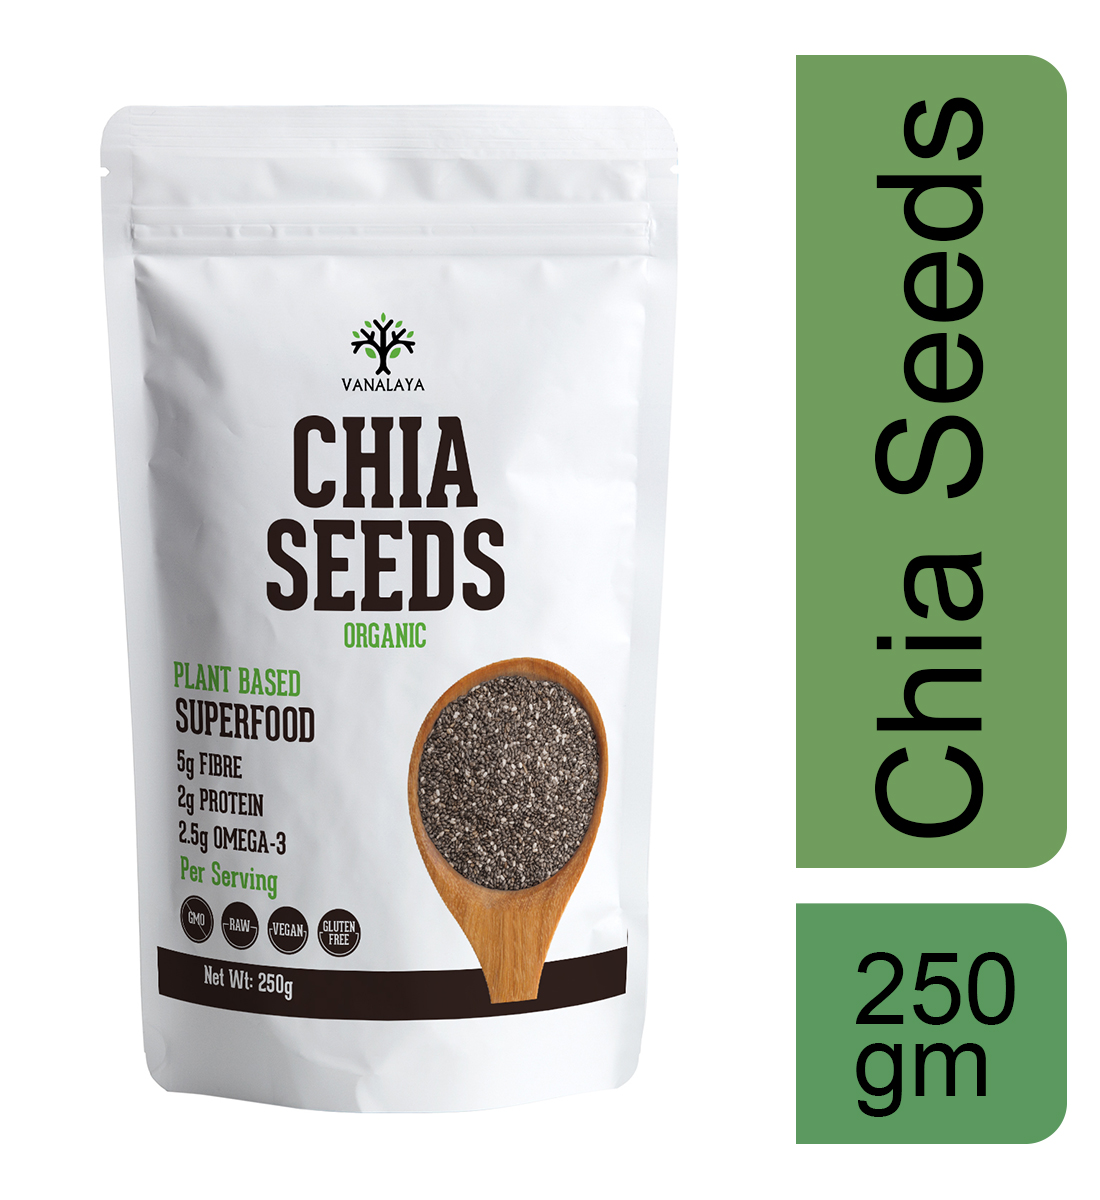 Picture of Vanalaya Raw Unroasted Chia Seeds for Eating with Omega 3 Protein and Fiber for Weight Loss Management - 250 gm